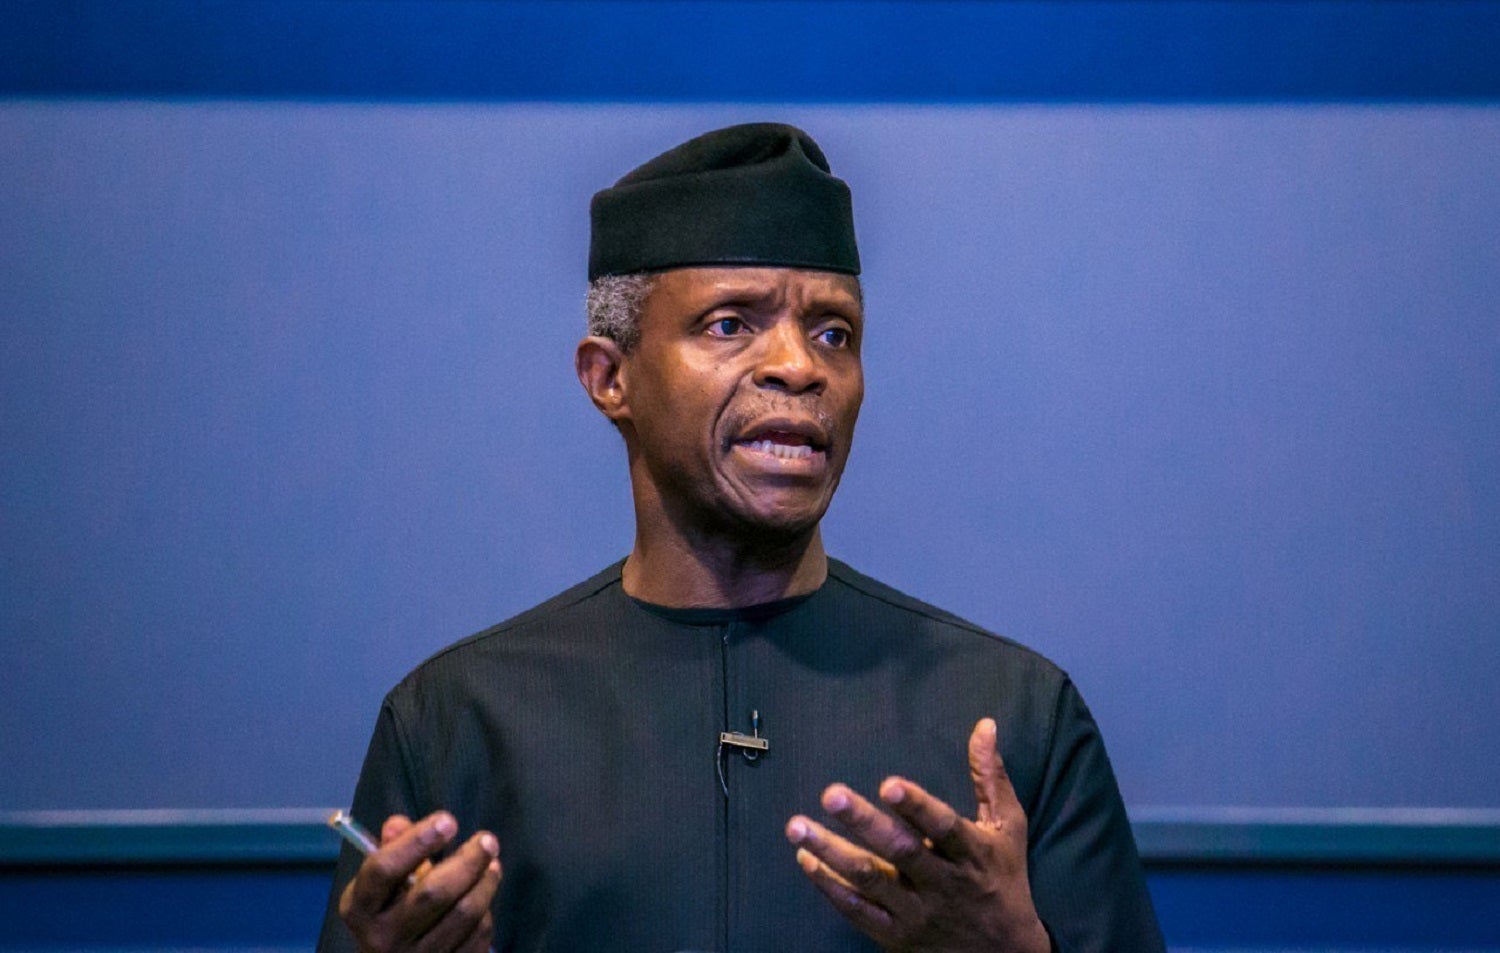 Osinbajo-led Economic Council Recommends Fuel Increase To N302 Per Litre By February